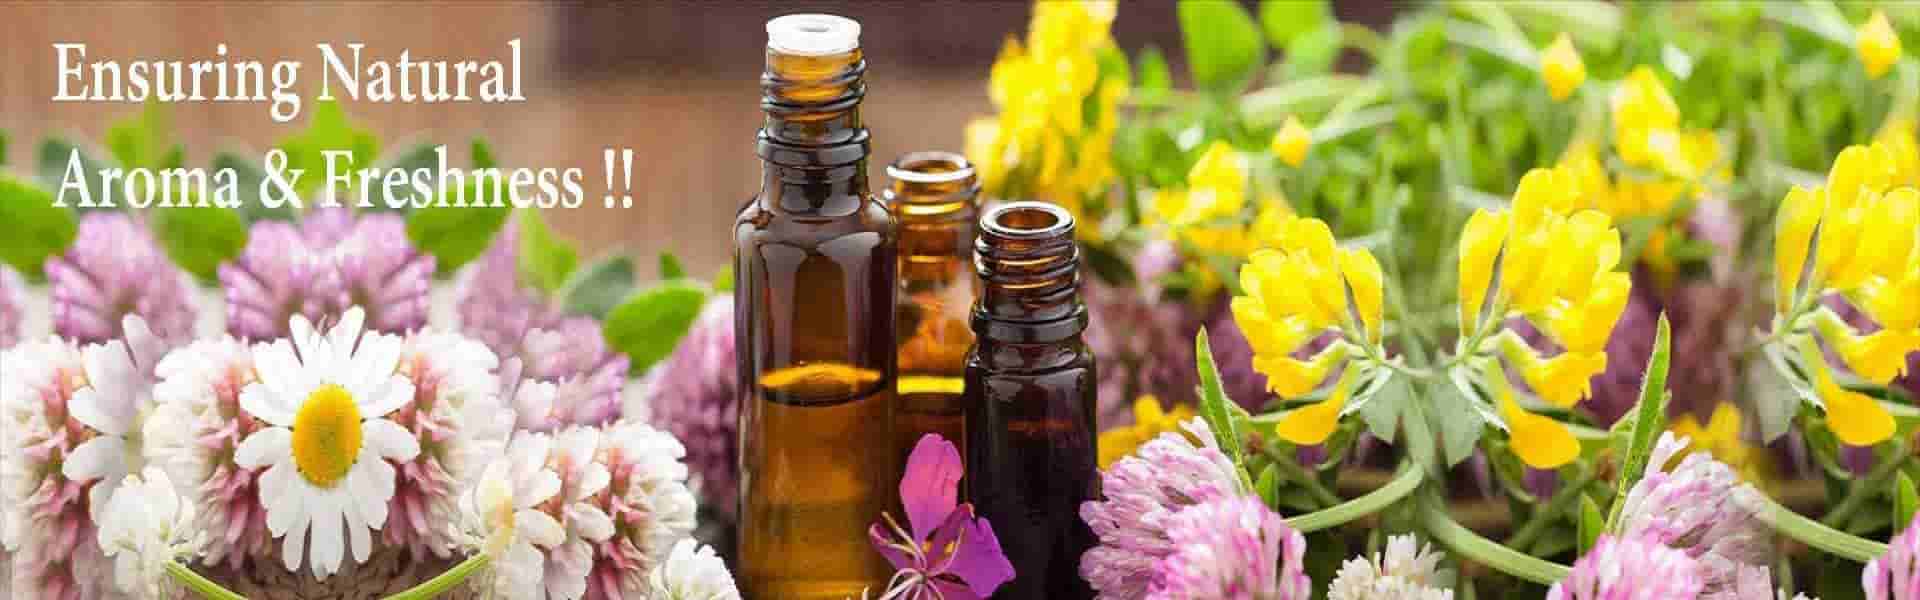 100% Natural: Find highest quality of Aromatherapy Oils